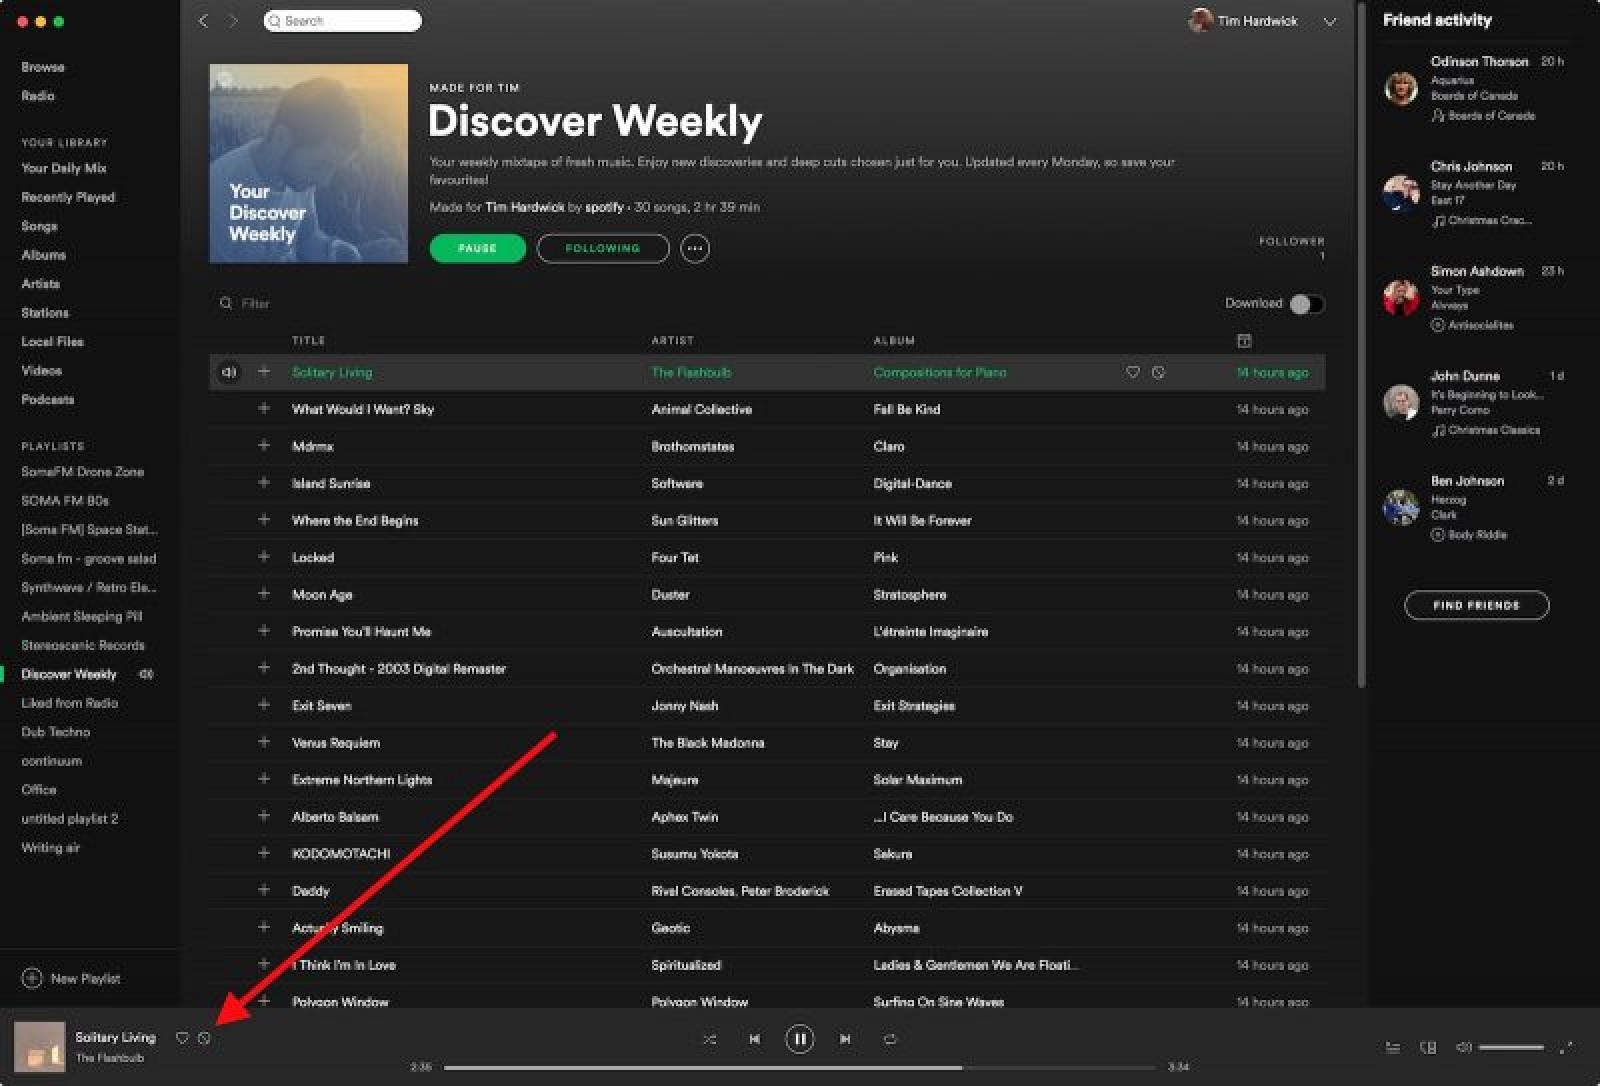 Spotify now playing overlay